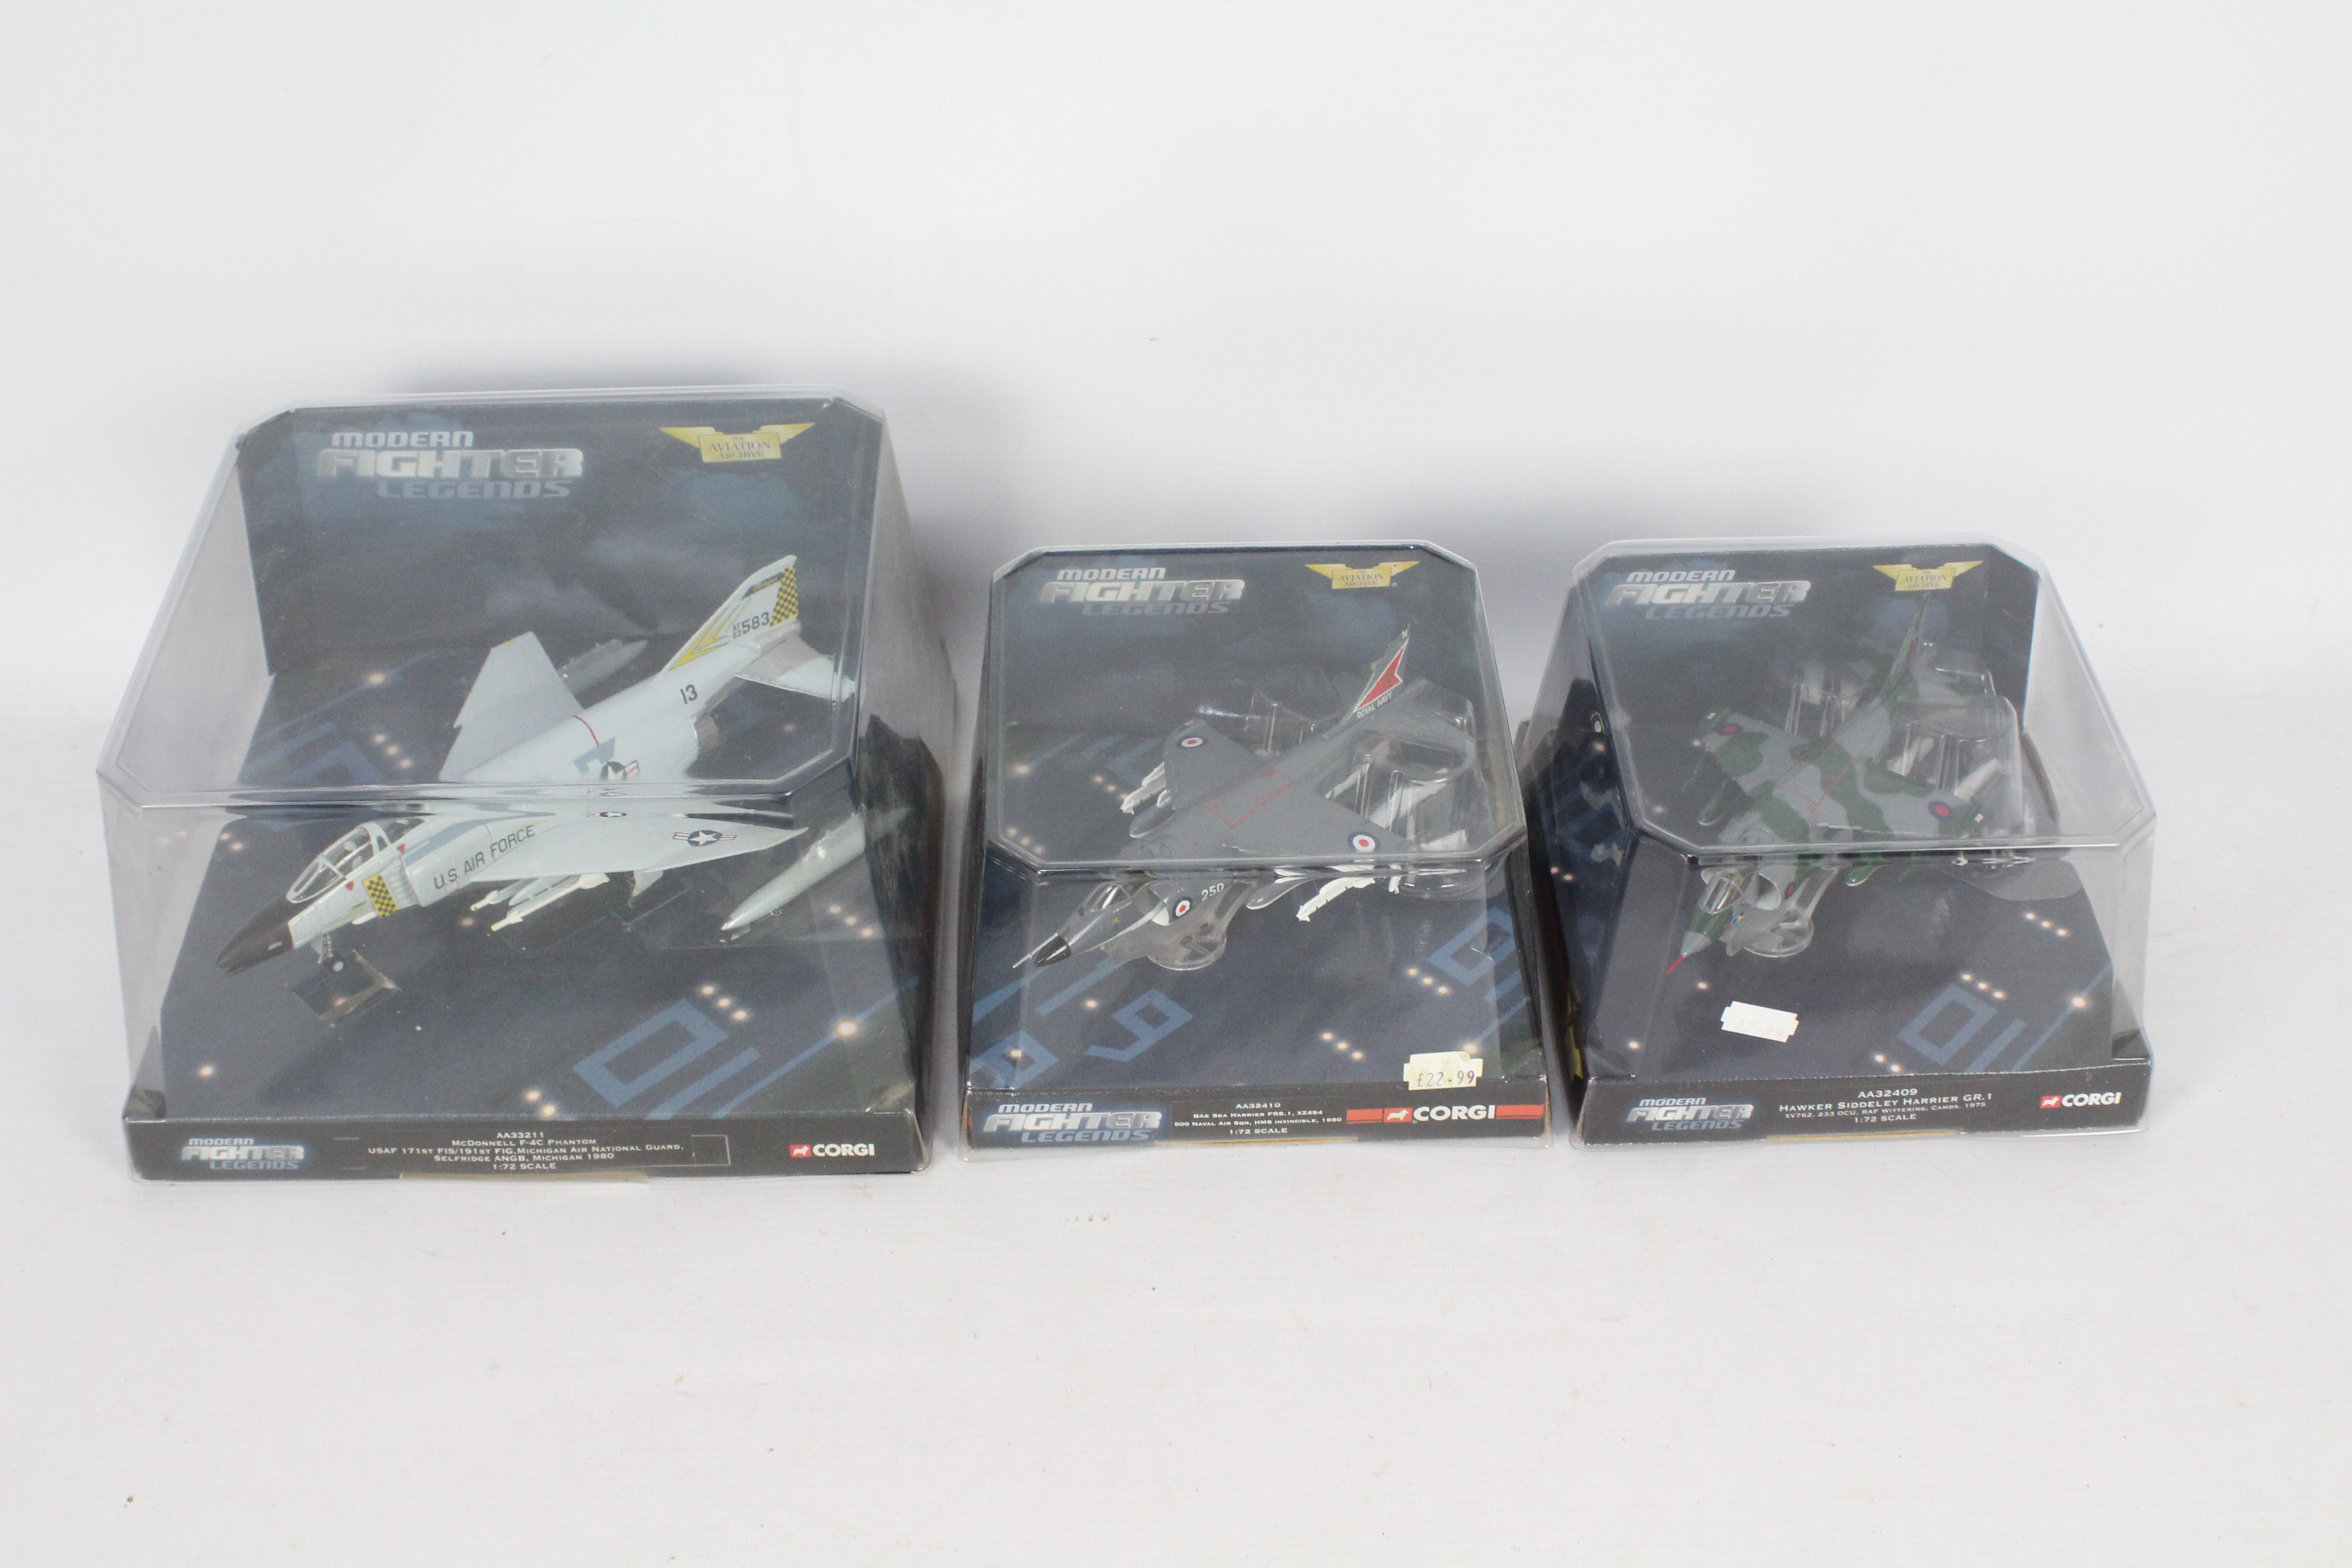 Corgi Aviation Archive - Three boxed 1:72 diecast model military aircraft from the CAA 'Modern